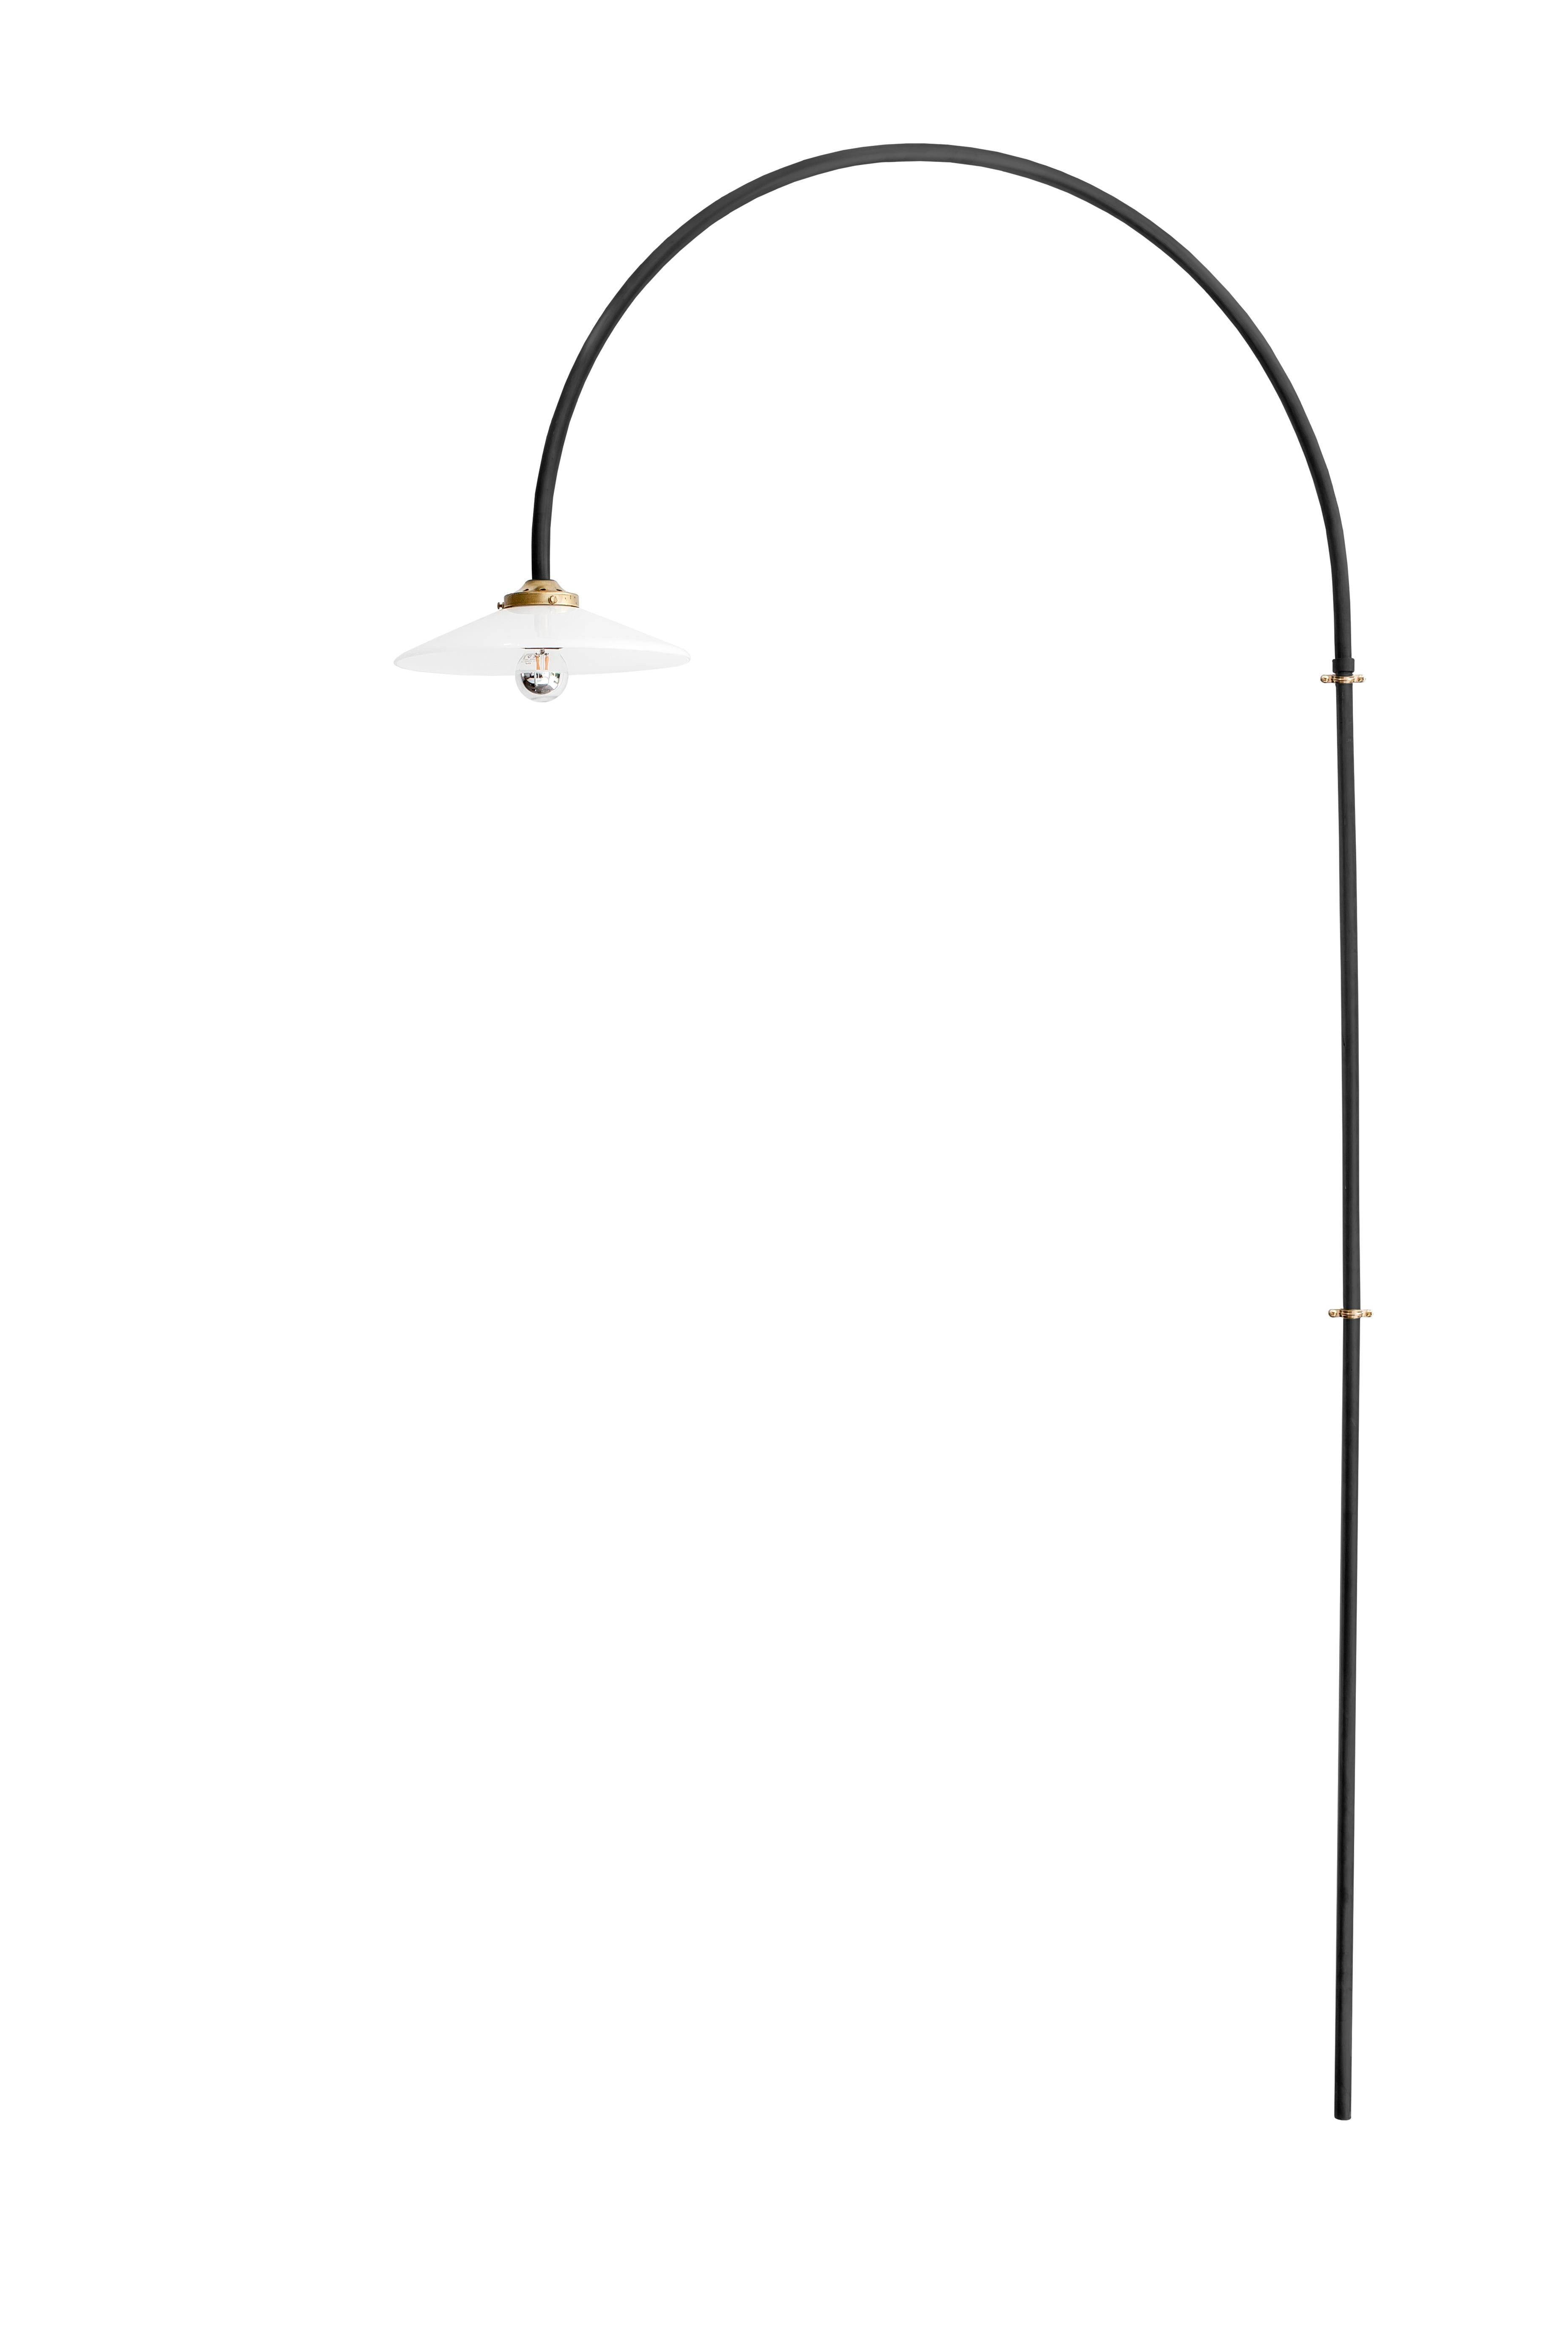 valerie objects hanging lamp